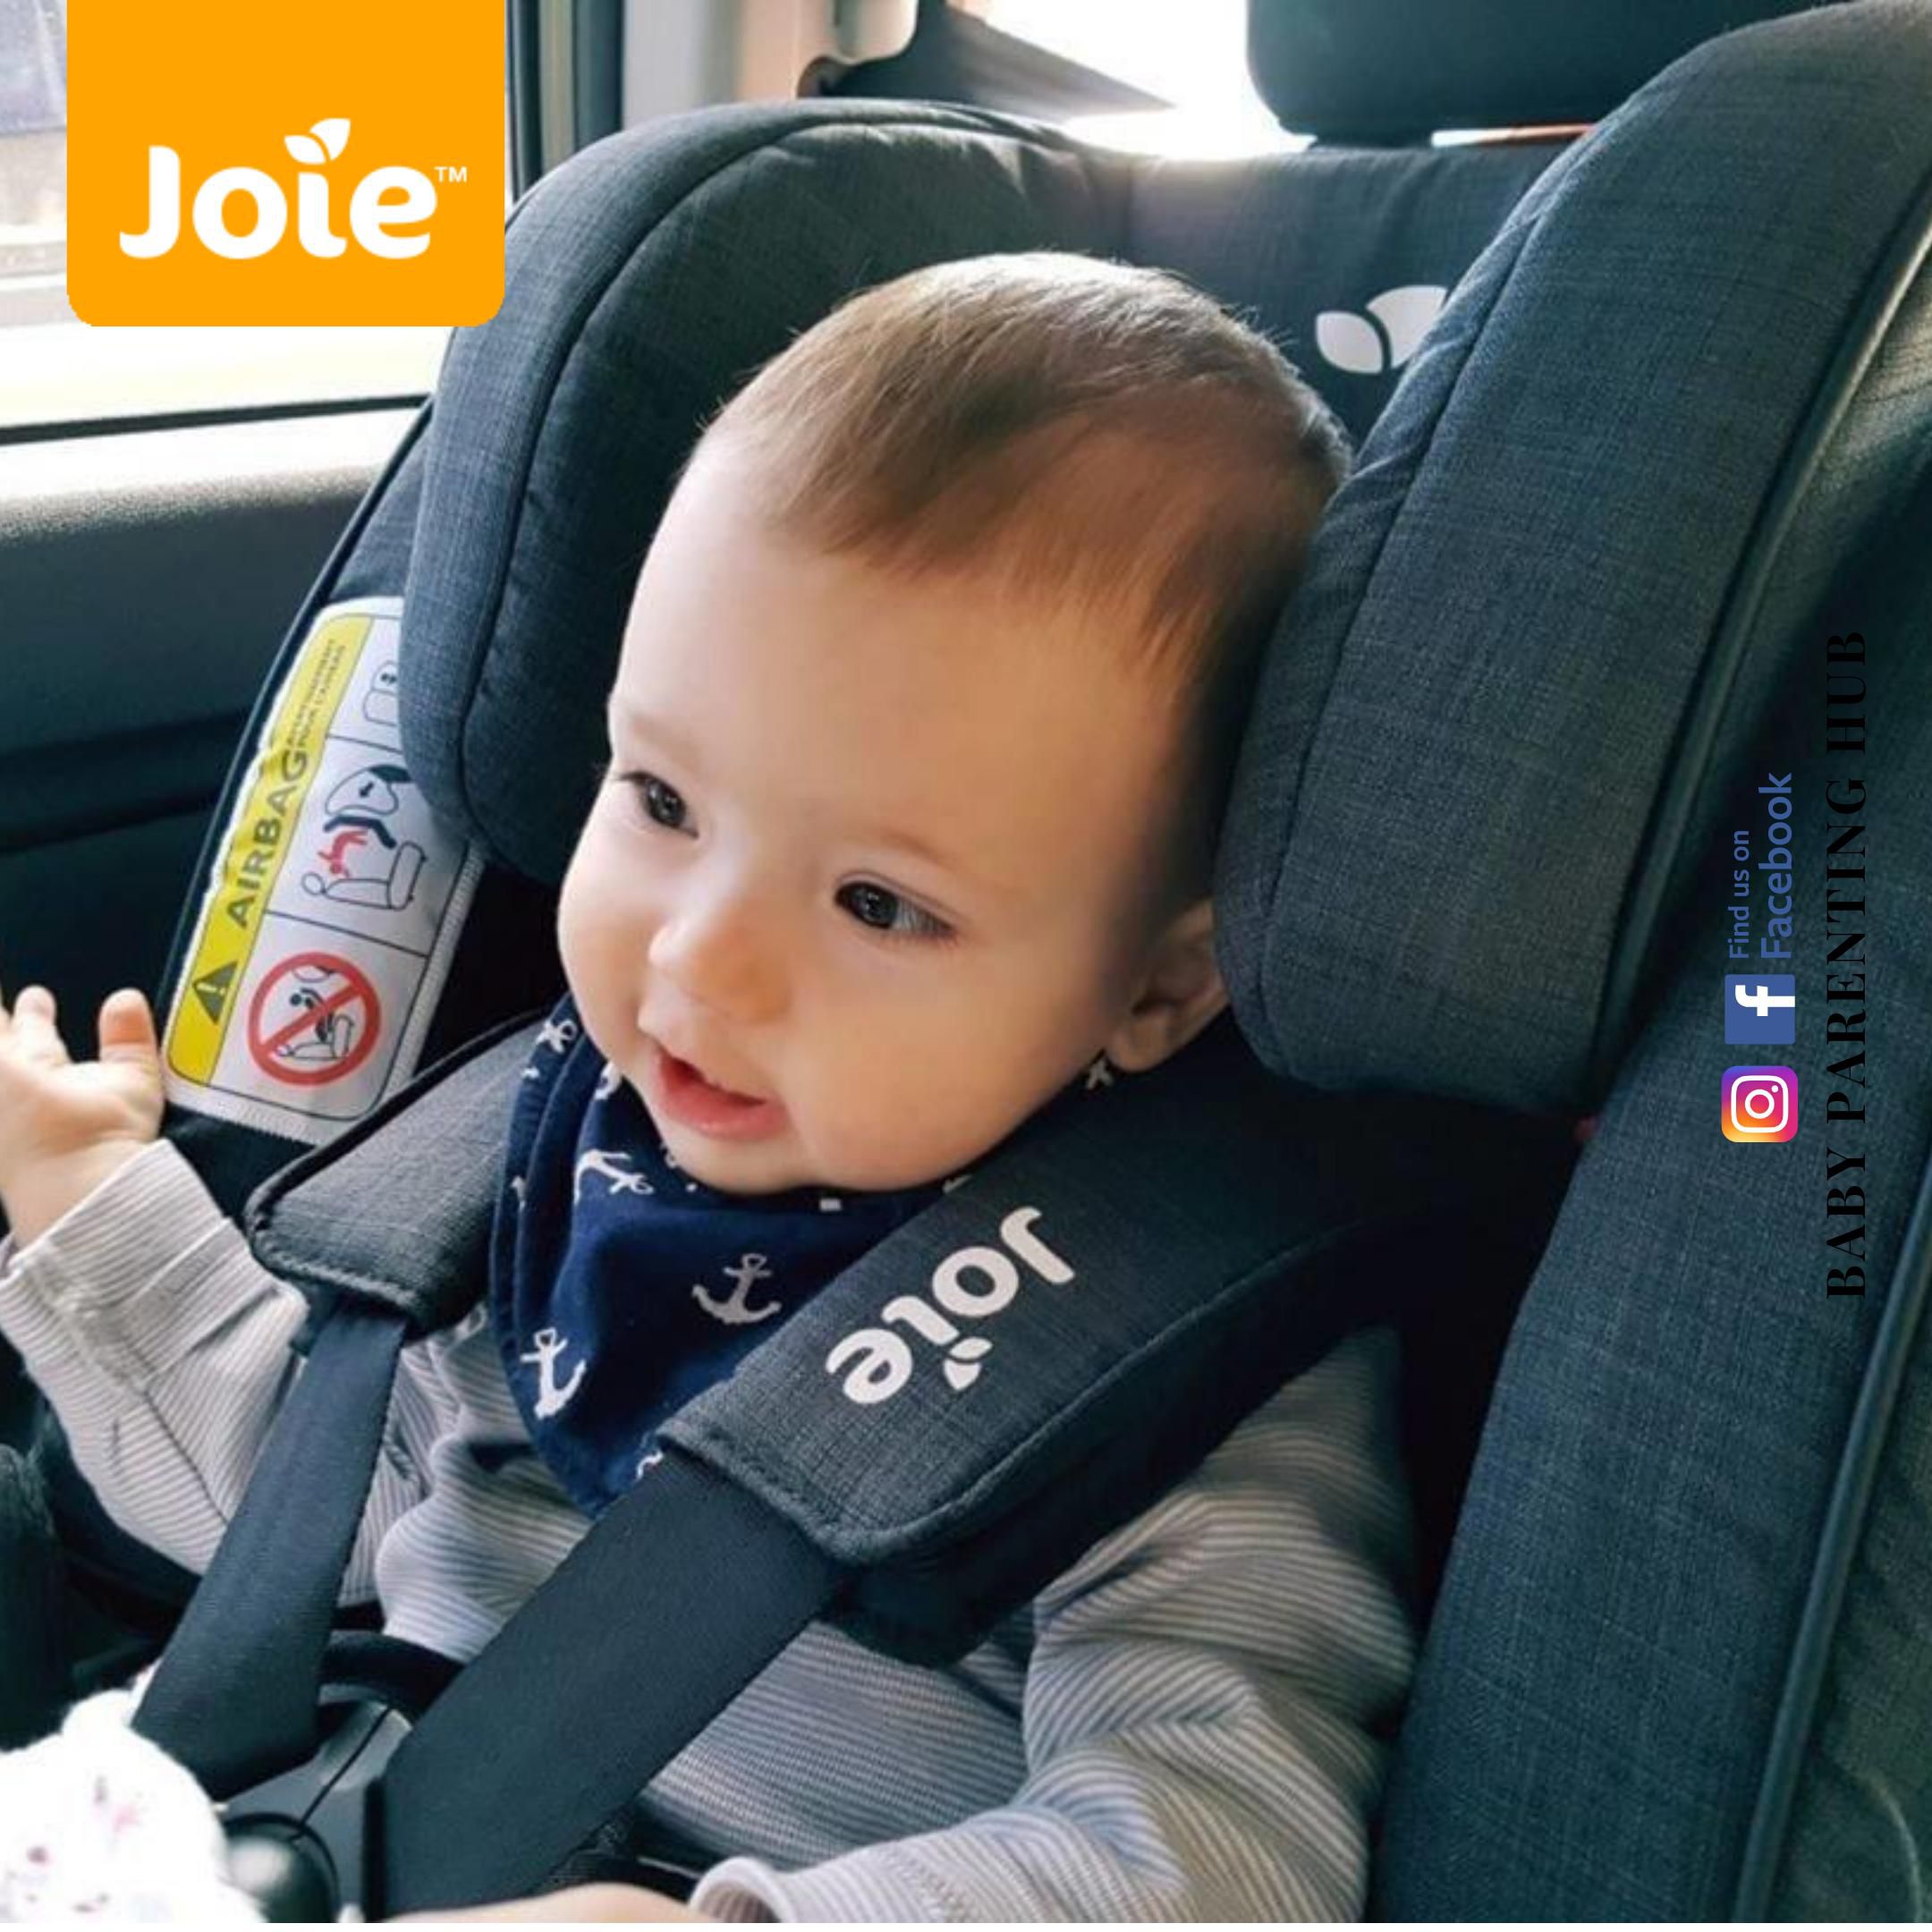 Joie Stages ISOFIX Pavement